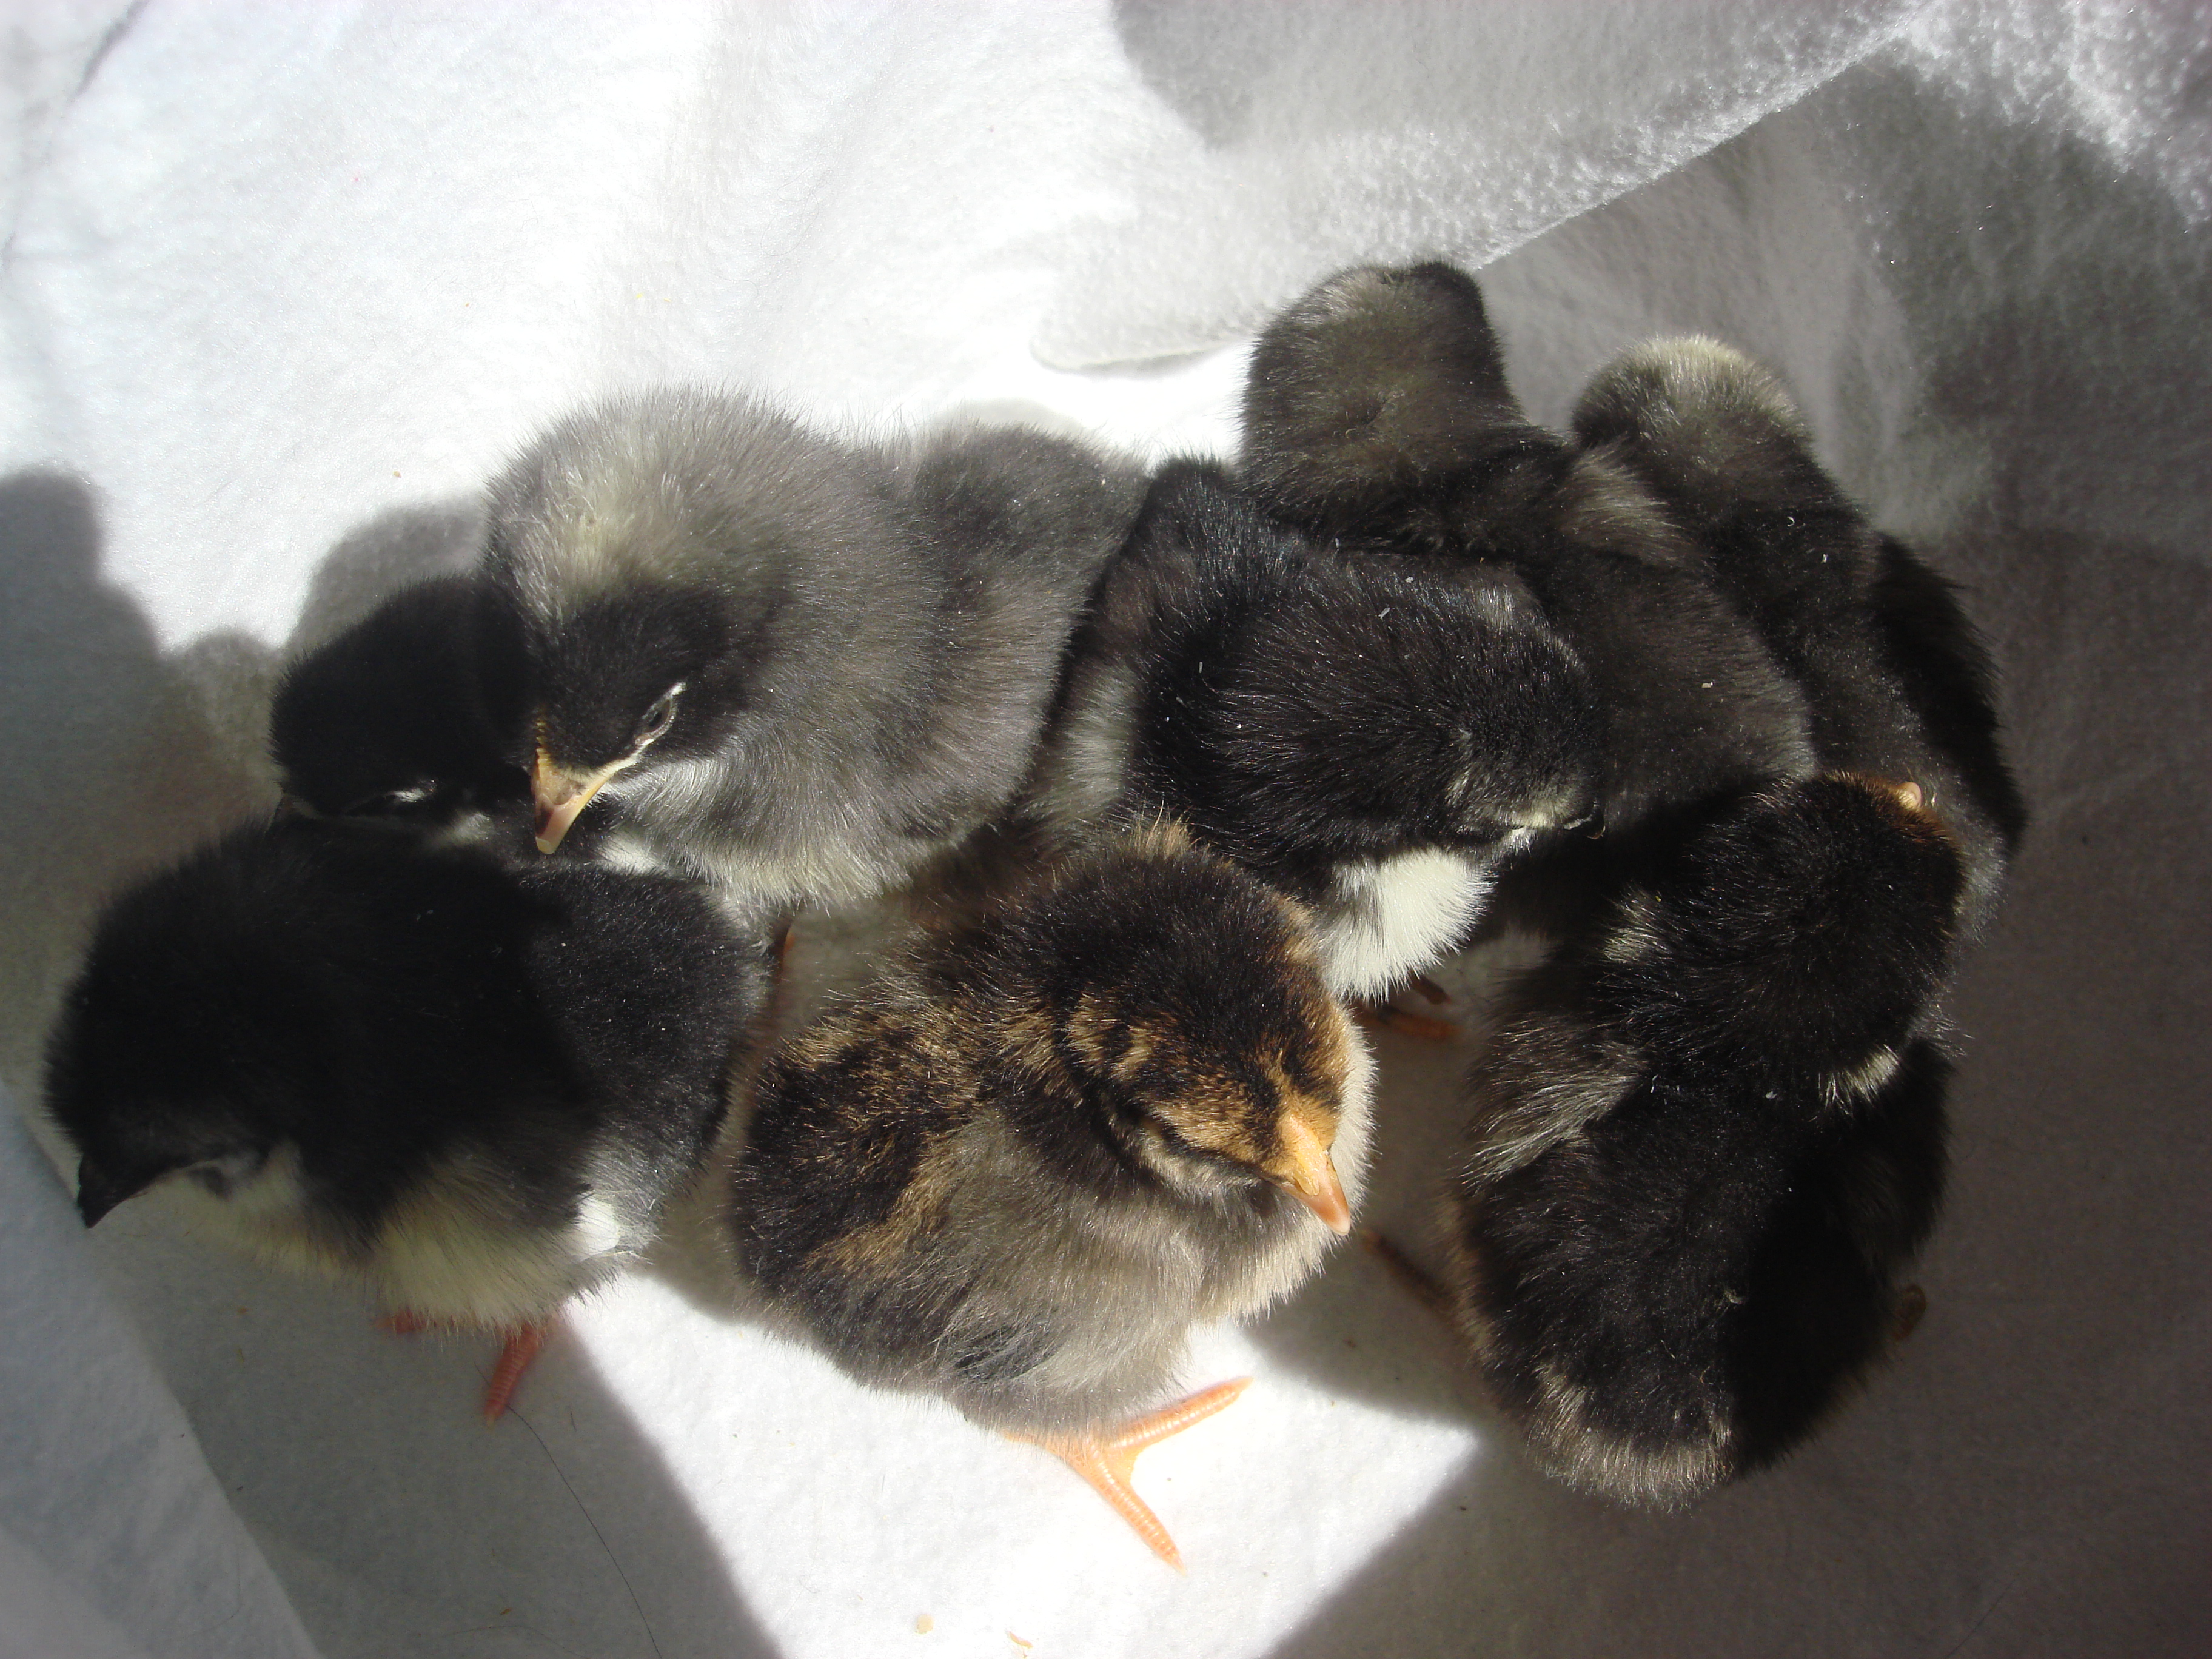 3 barred rocks
3 black austrolorps
1 gold laced wy
1 silver laced wy
5 days old